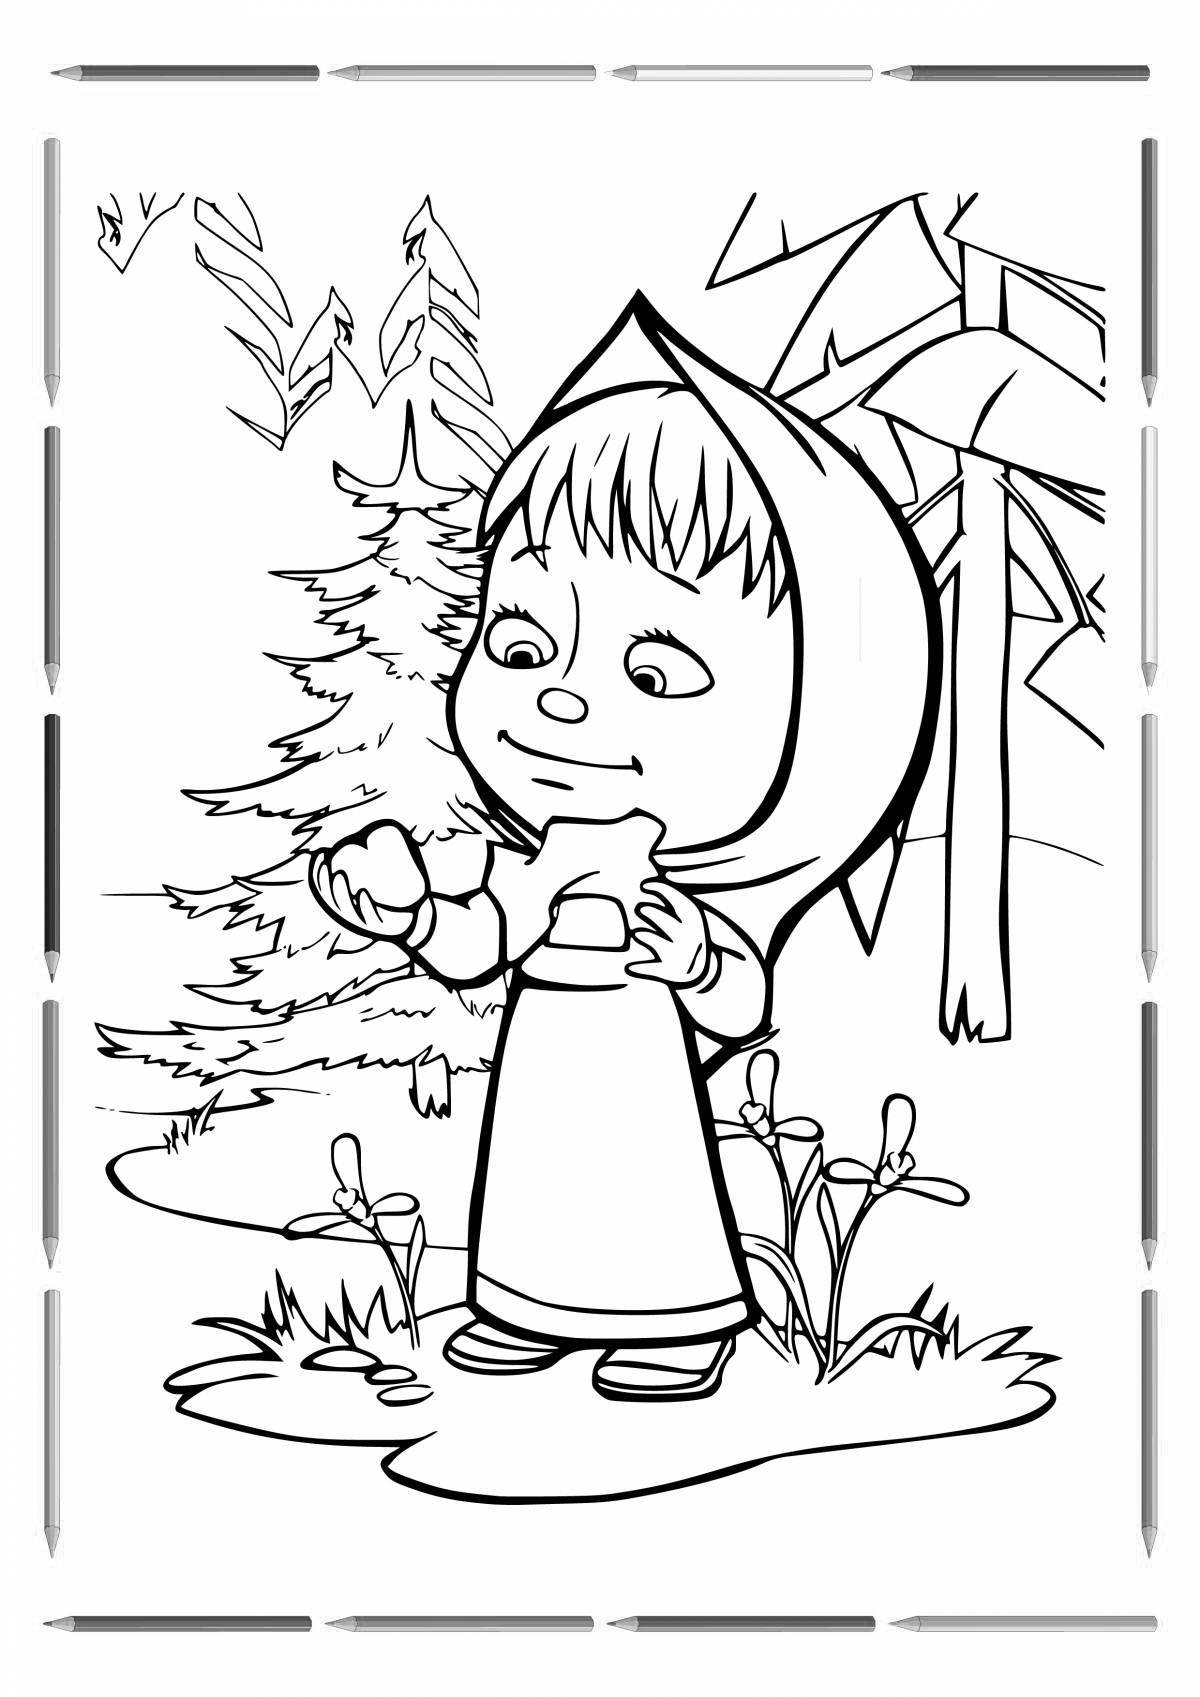 Color explosion masha and the bear coloring book